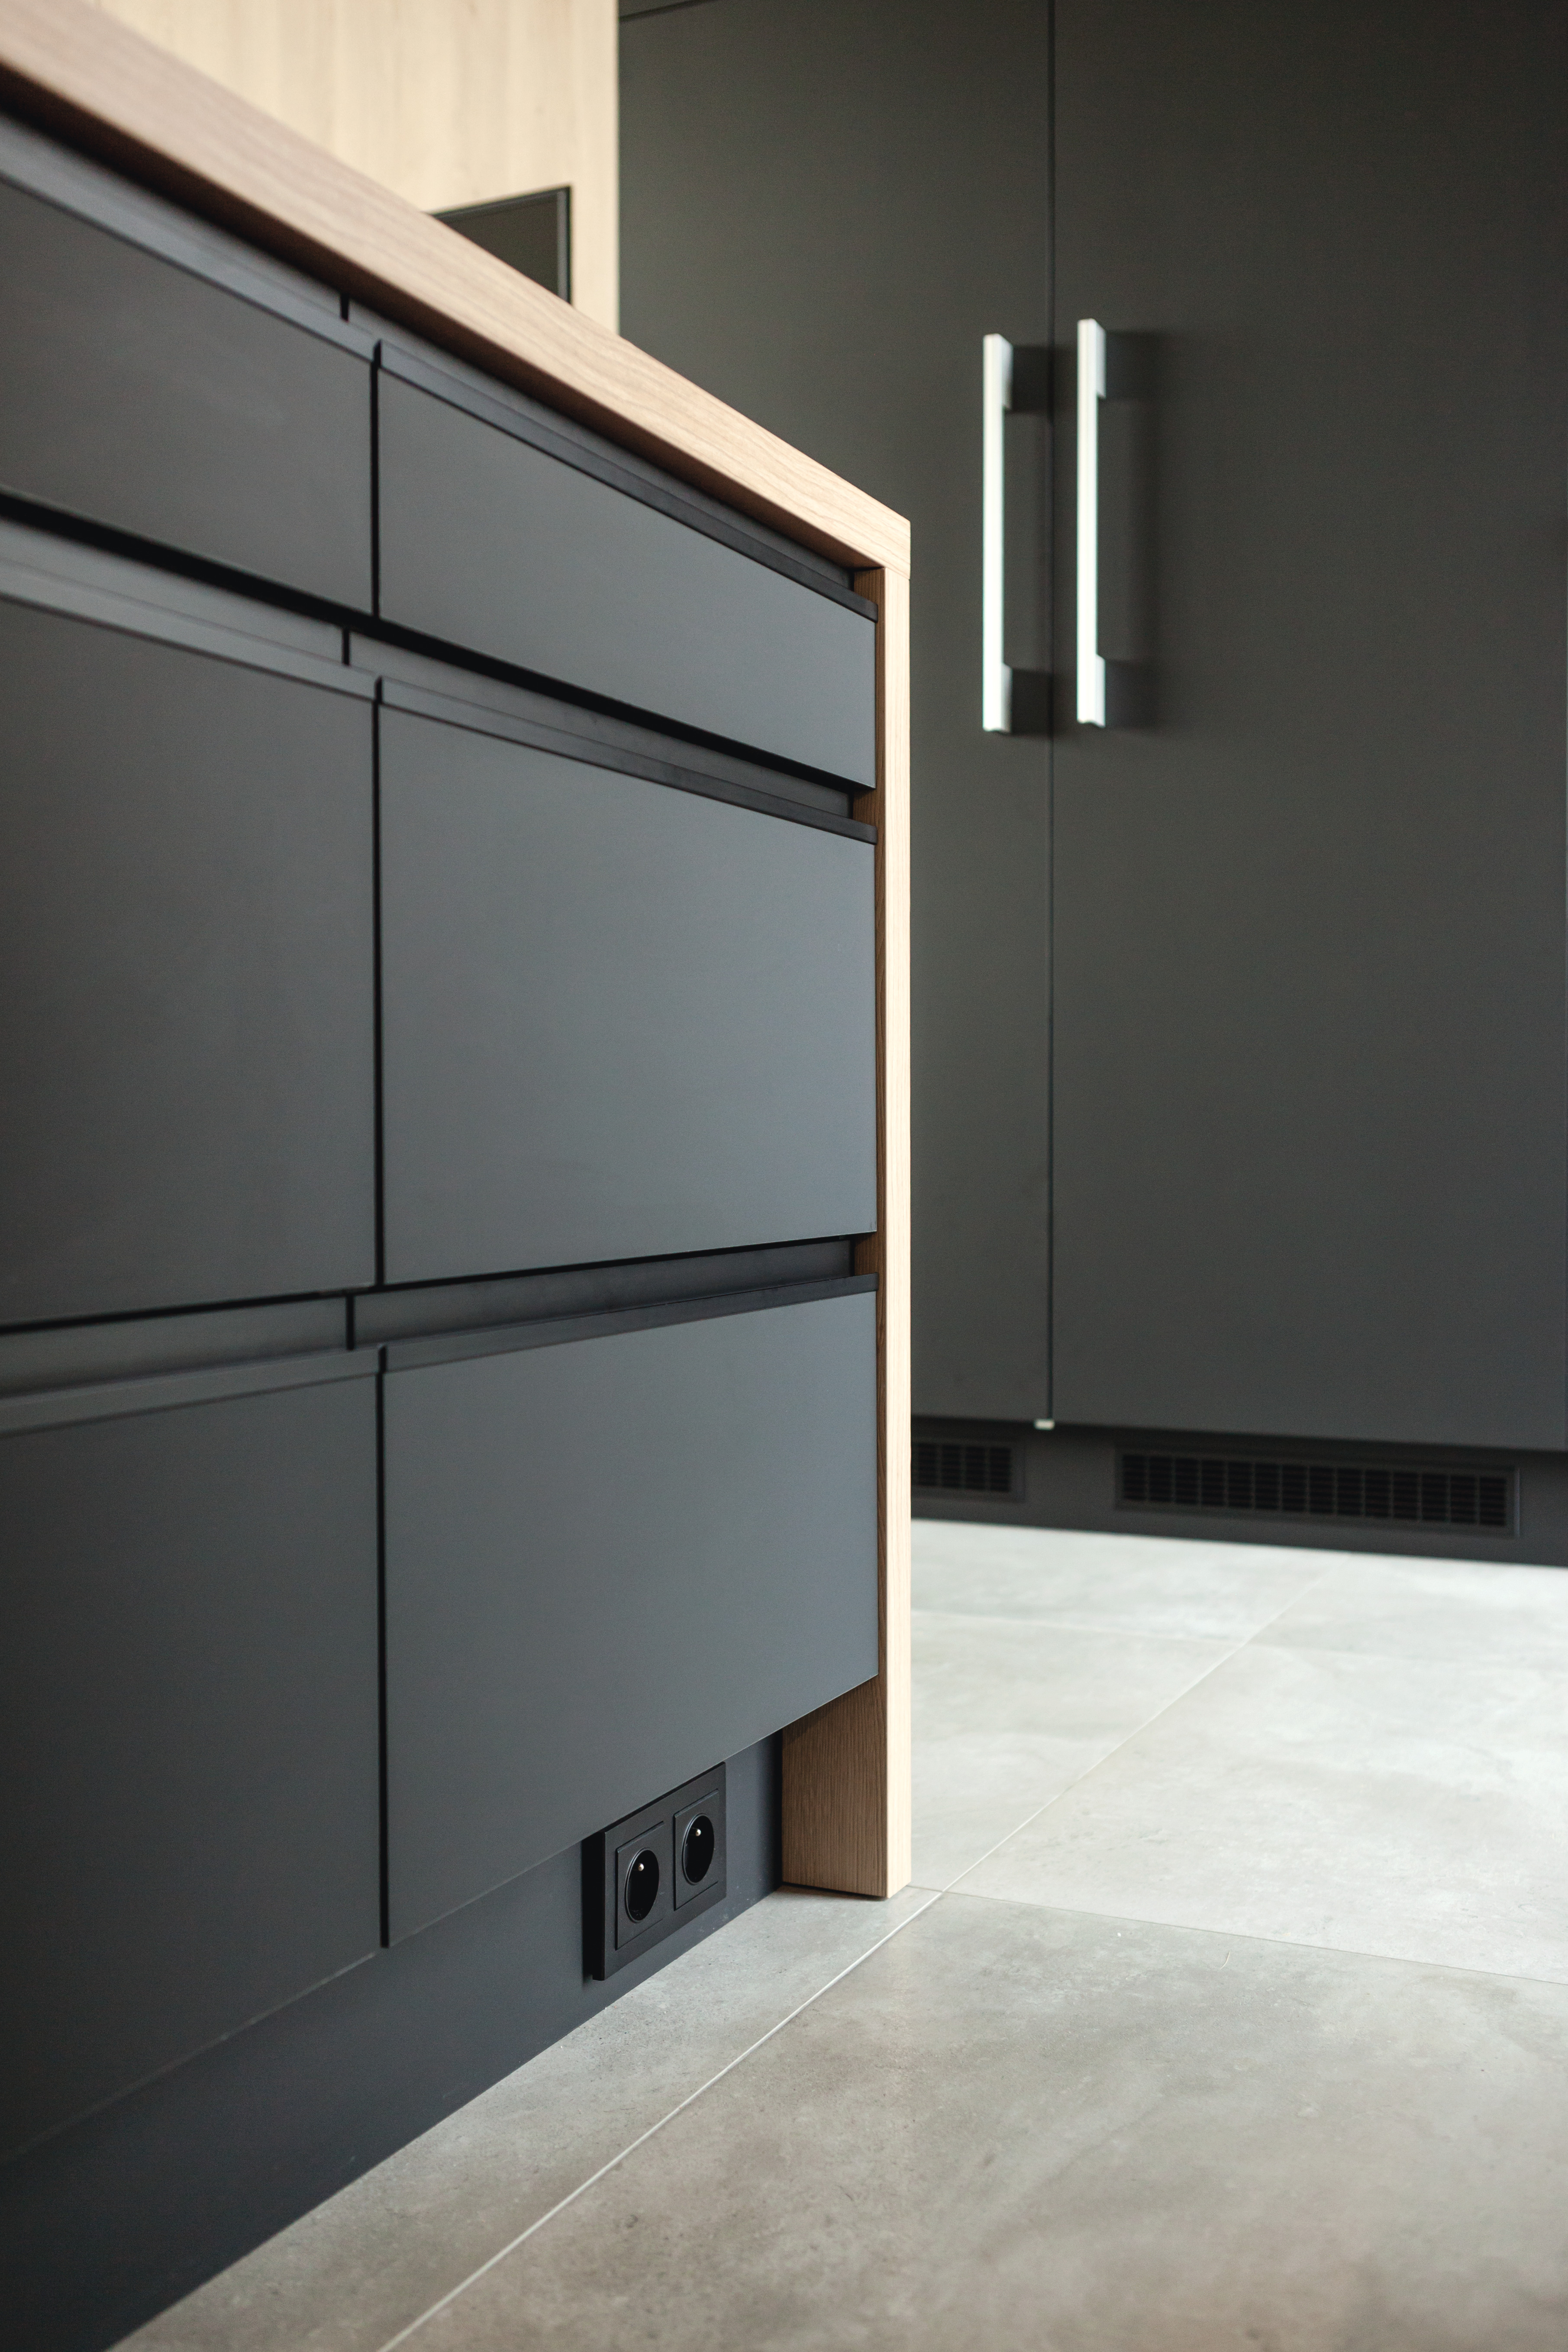 The U999 PM Black in PerfectSense Matt is in harmony with the naturalness of the H3309 ST28 Sand Gladstone Oak.